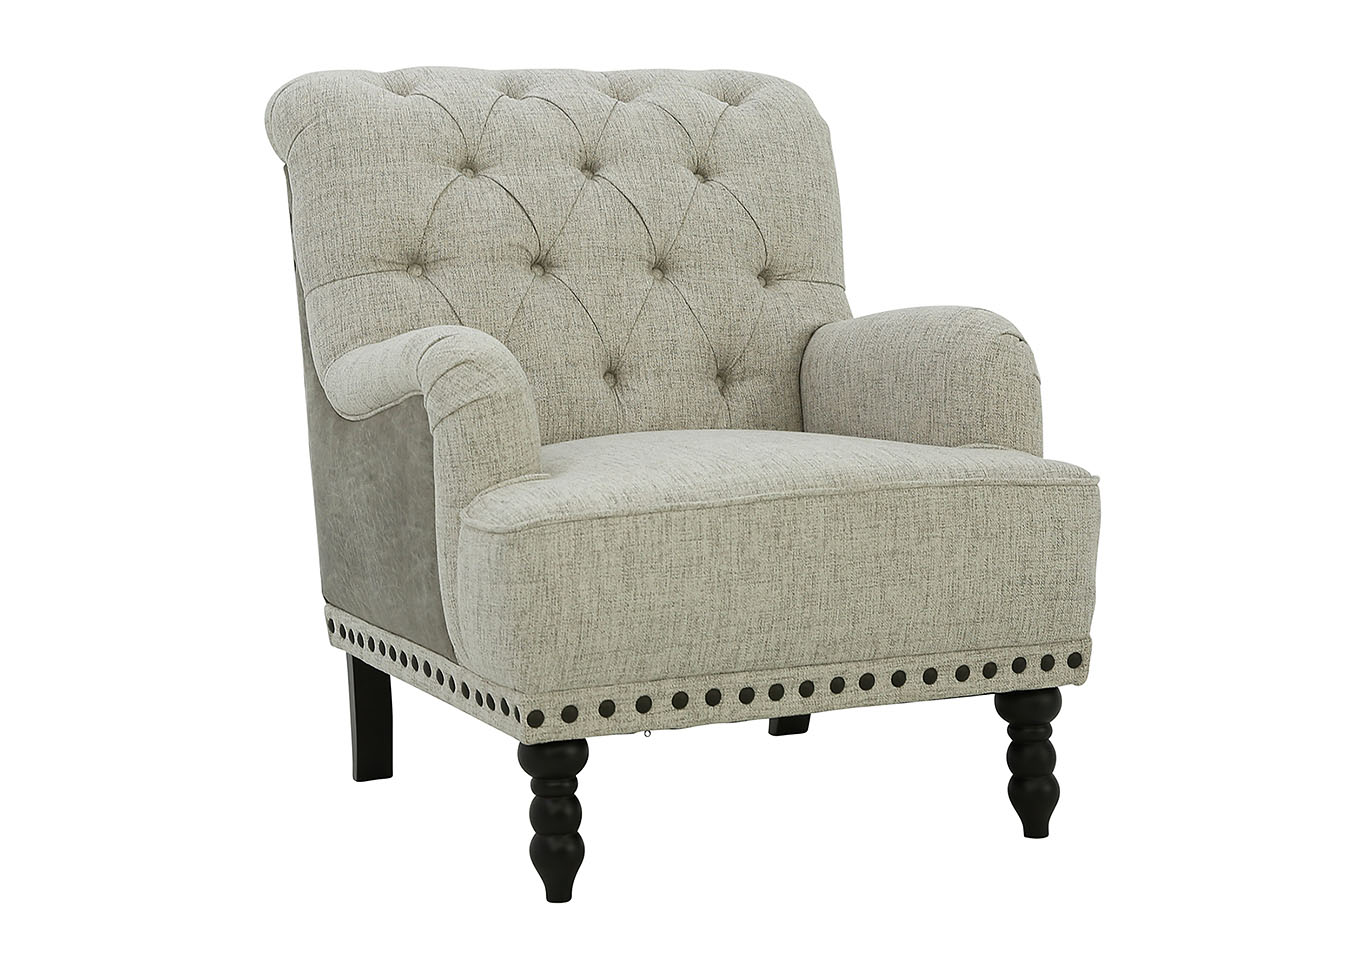 Write A Review TARTONELLE IVORY/ANTIQUE ACCENT CHAIR